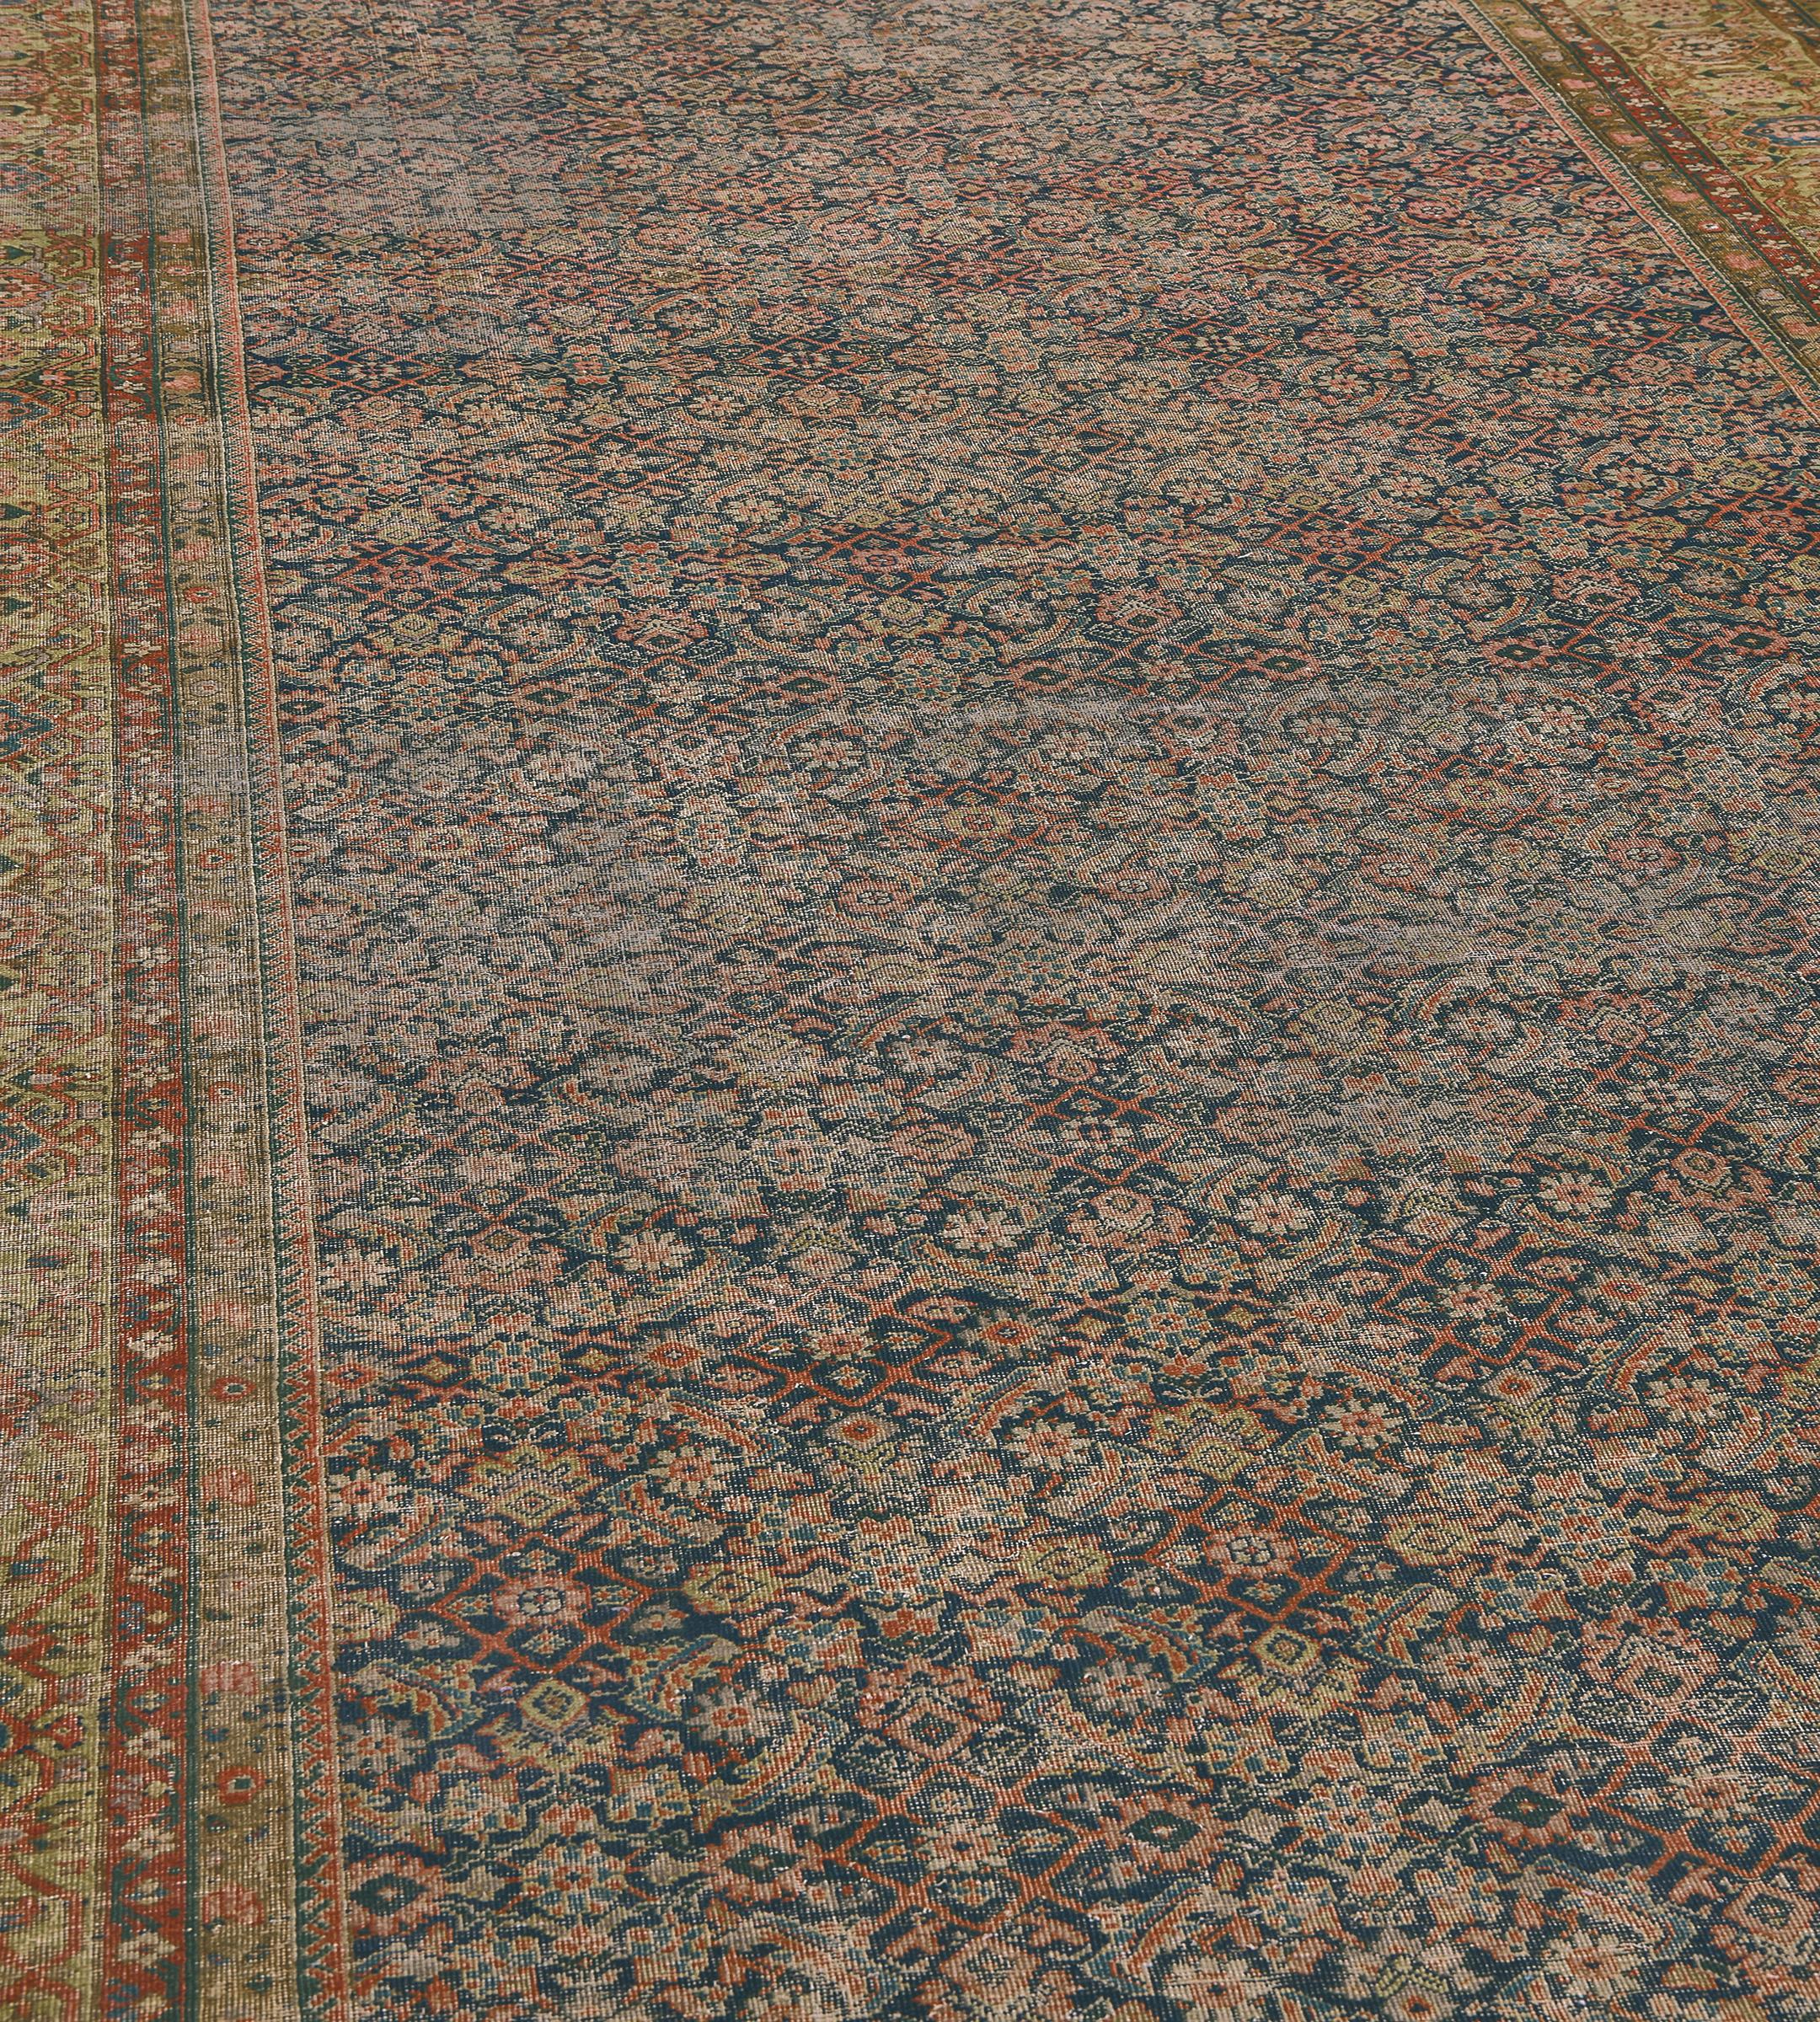 This traditional hand-woven Persian Fereghan rug has a shaded deep indigo herati field, in a faded camel turtle-palmette border, between a profusion of delicate laced floral vine stripes.